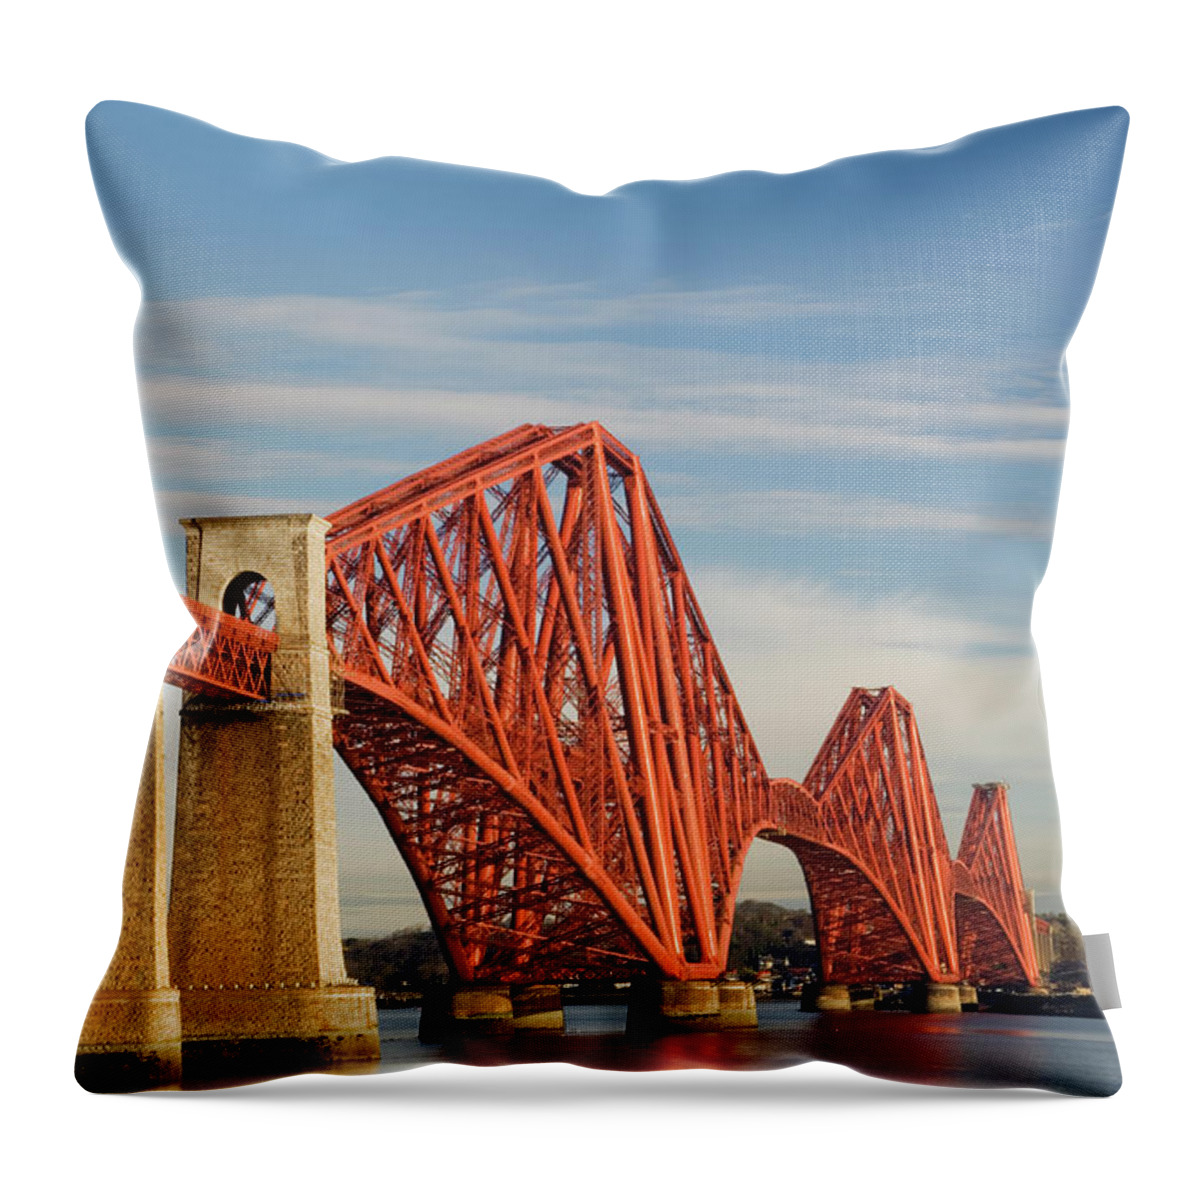 Cantilever Bridge Throw Pillow featuring the photograph The Forth Rail Bridge by Northlightimages